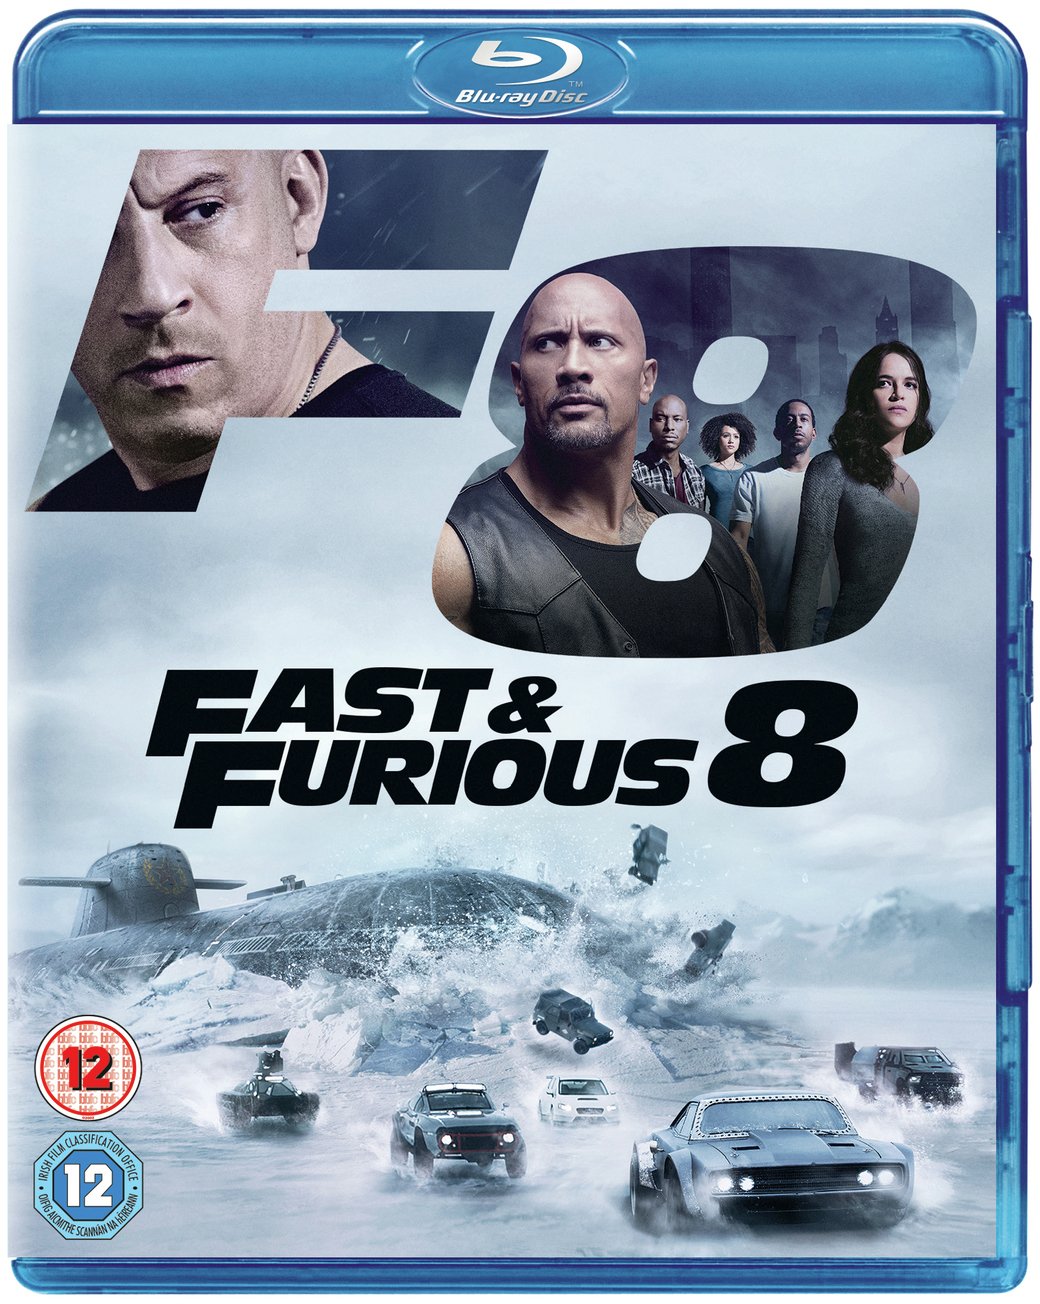 Fast & Furious 8 Blu-ray Review